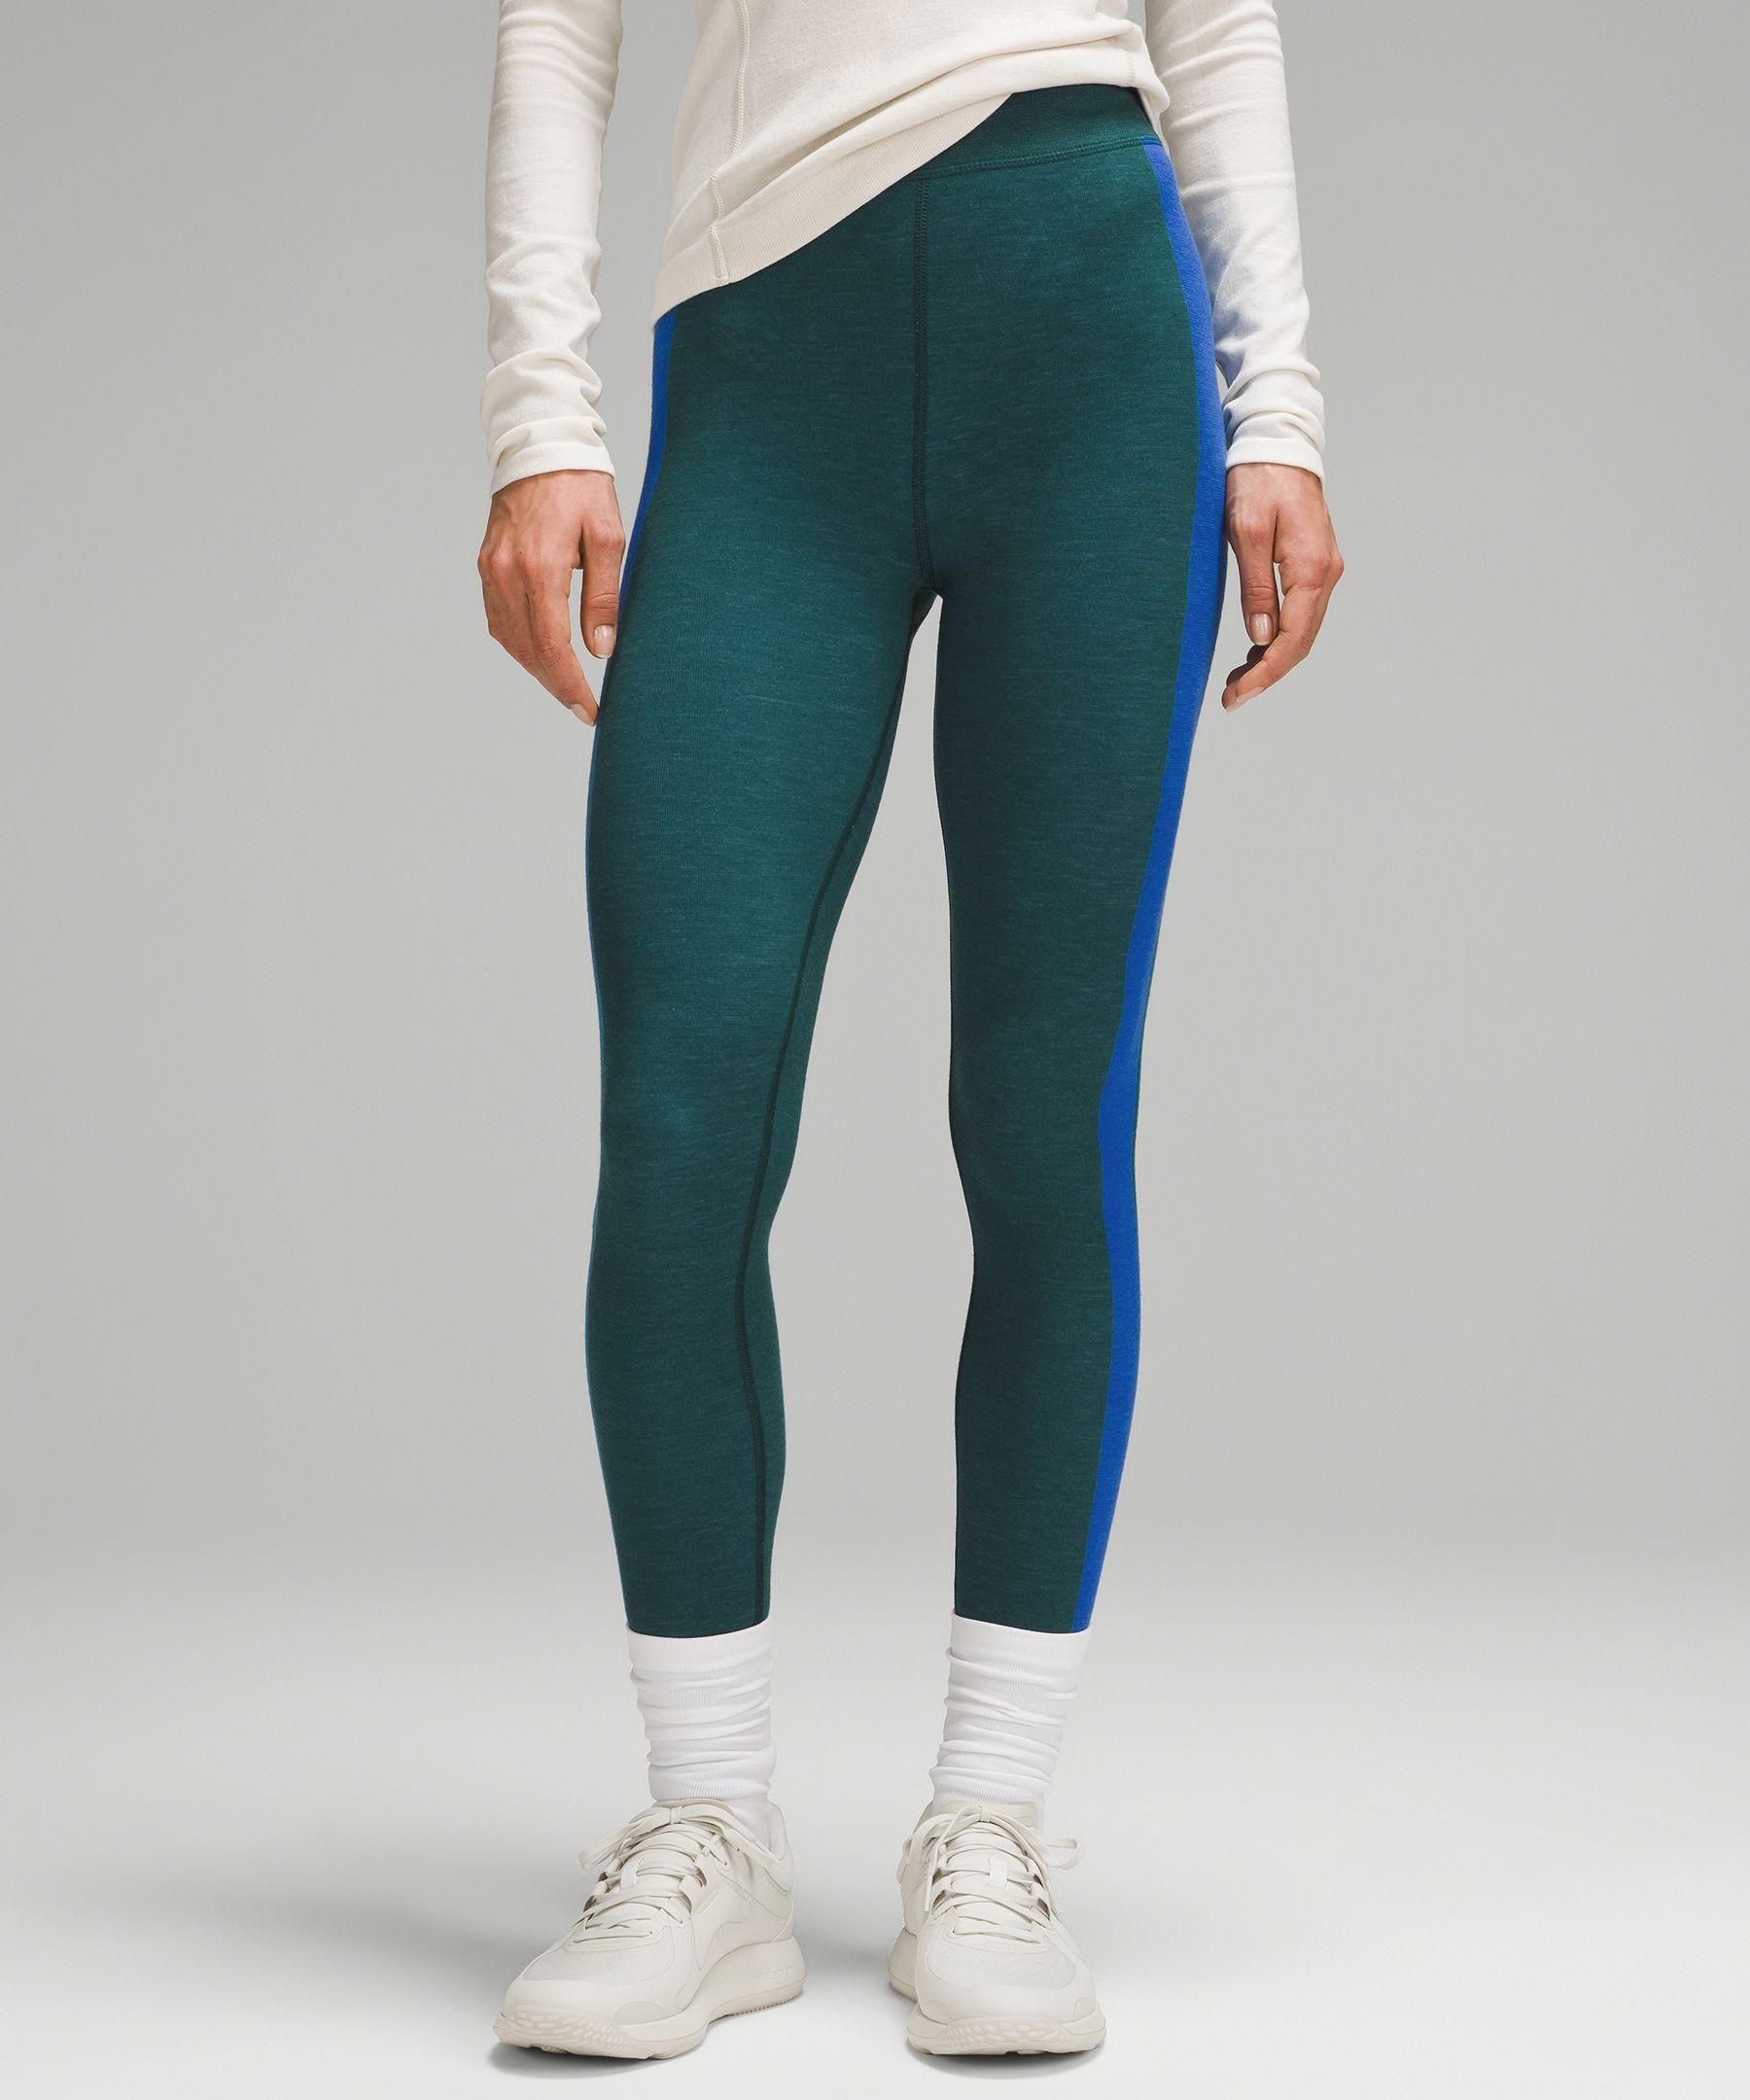 lululemon athletica Keep The Heat Thermal High-rise Tight Leggings  Colourblock - 28 - Color Blue/green - Size 0